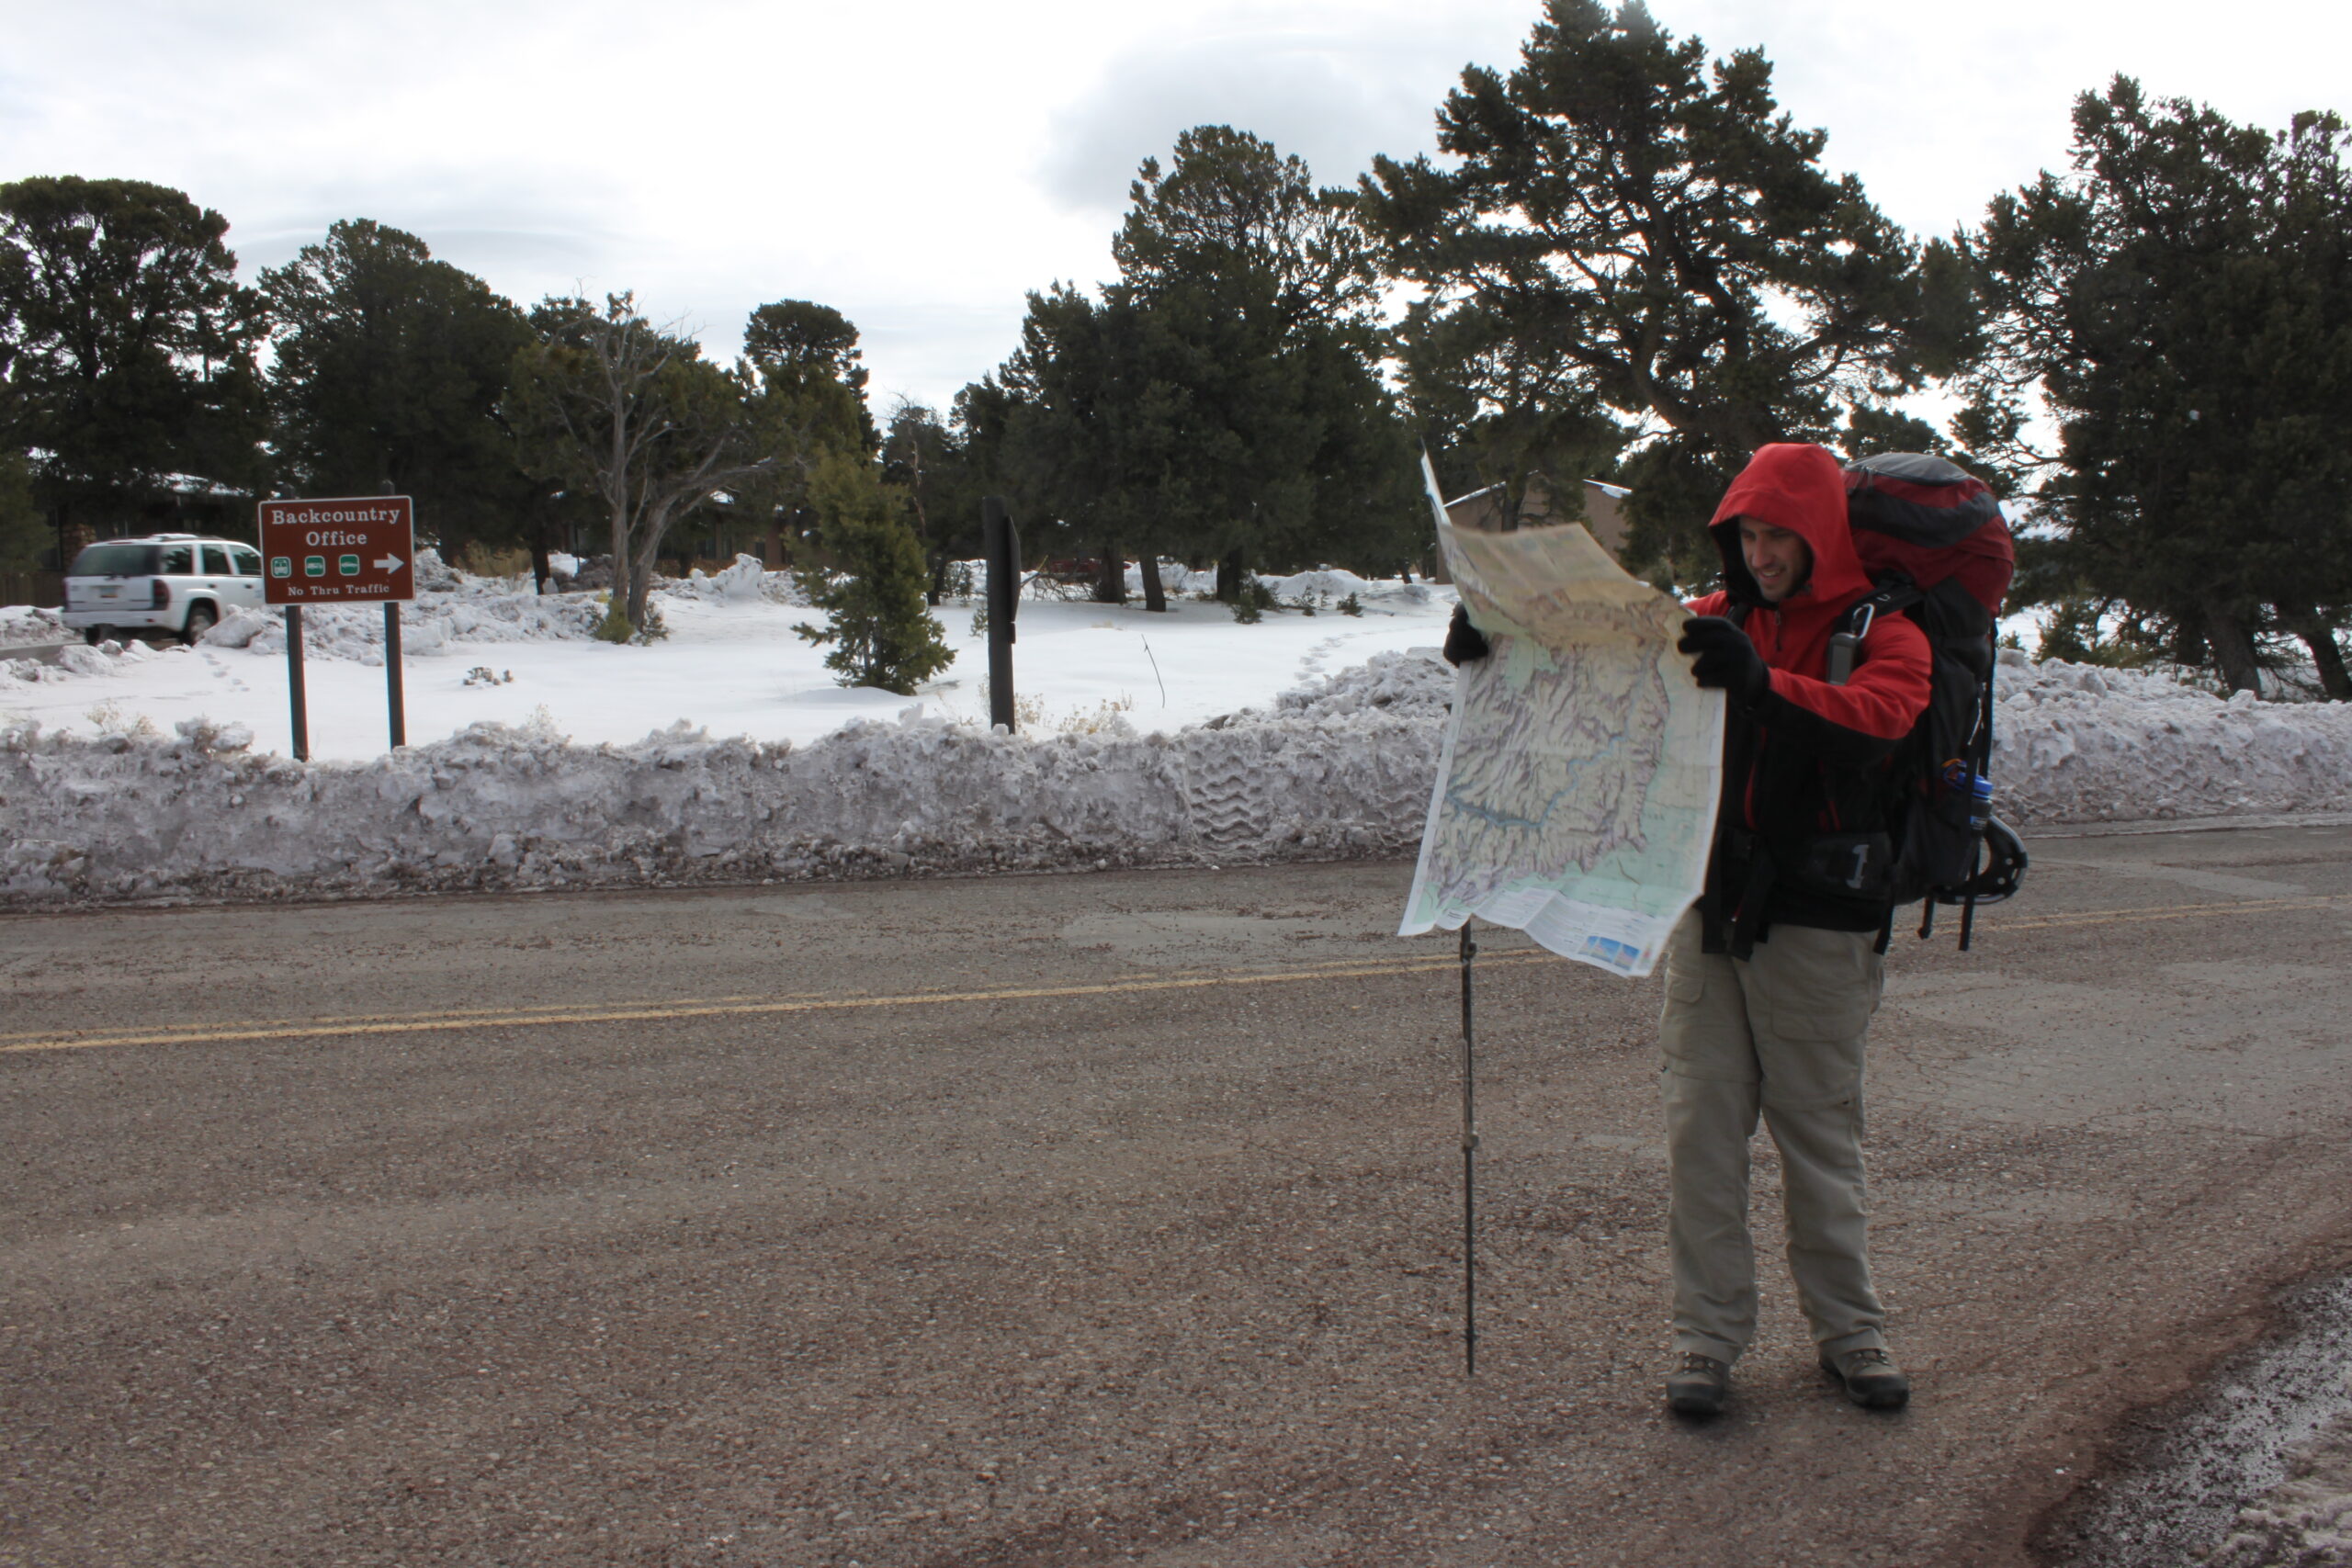 Hank searches for the Grand Canyon's Bright Angel Trailhead on a topographical map.